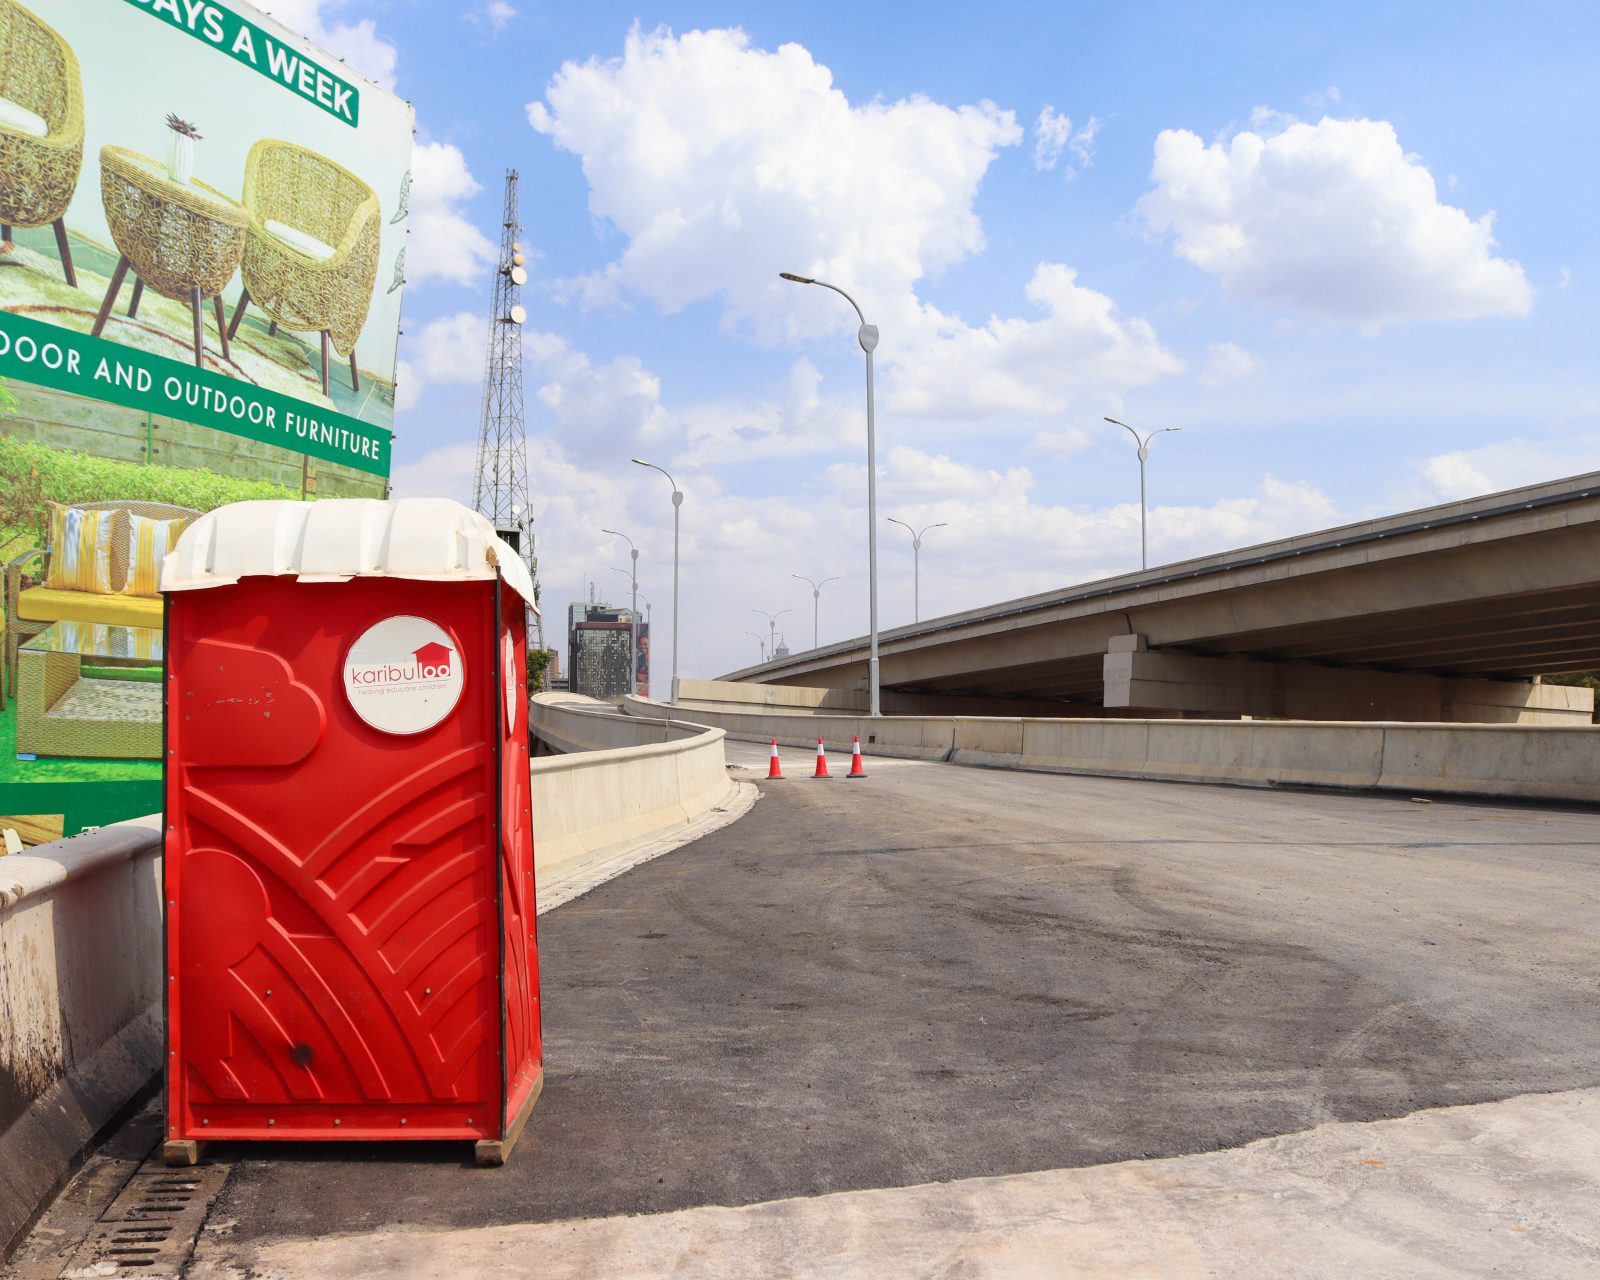 Portable Toilet Rentals for Construction Sites: What to Know